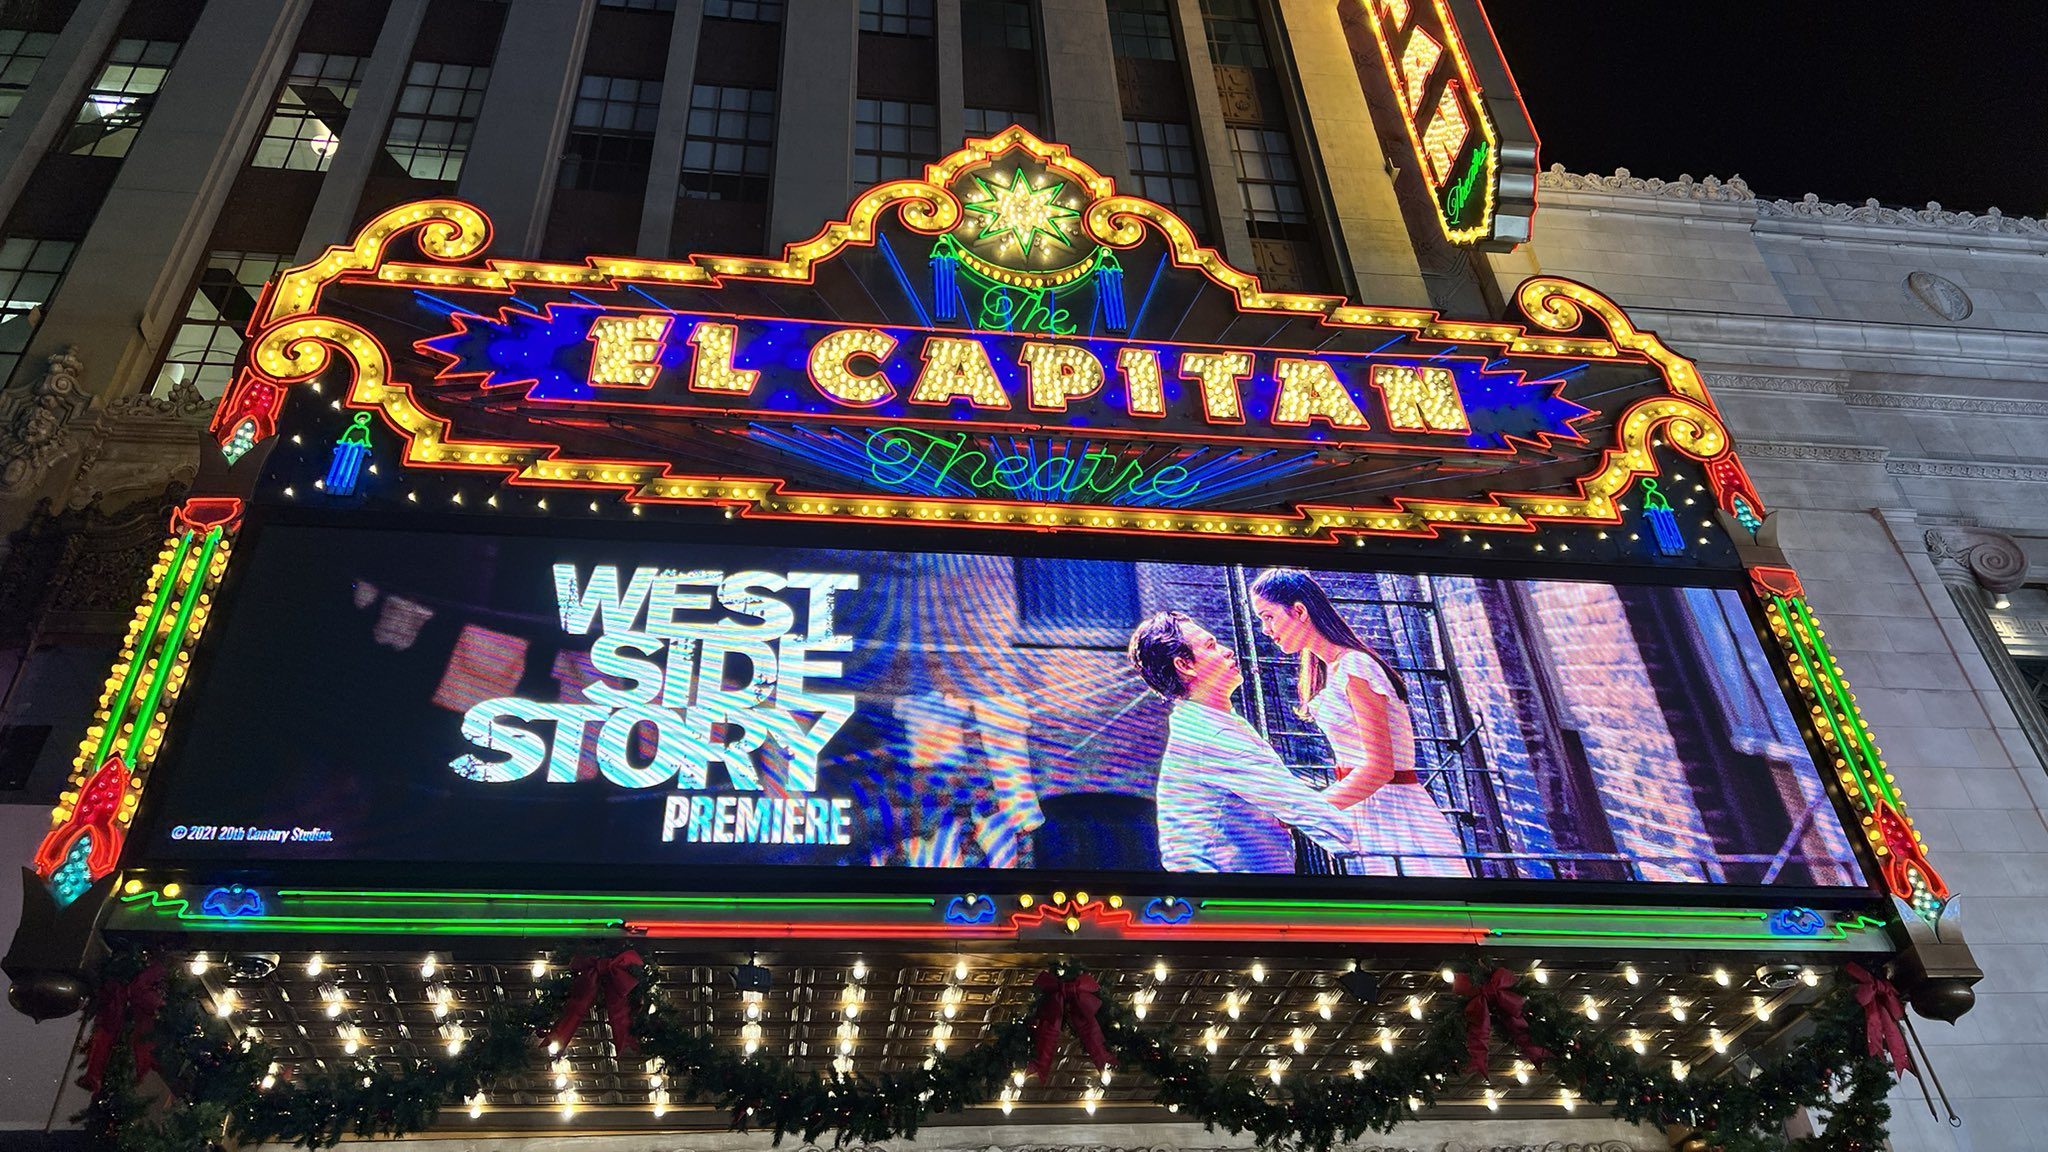 ‘West Side Story’ Opens Internationally, but Not in Gulf Countries